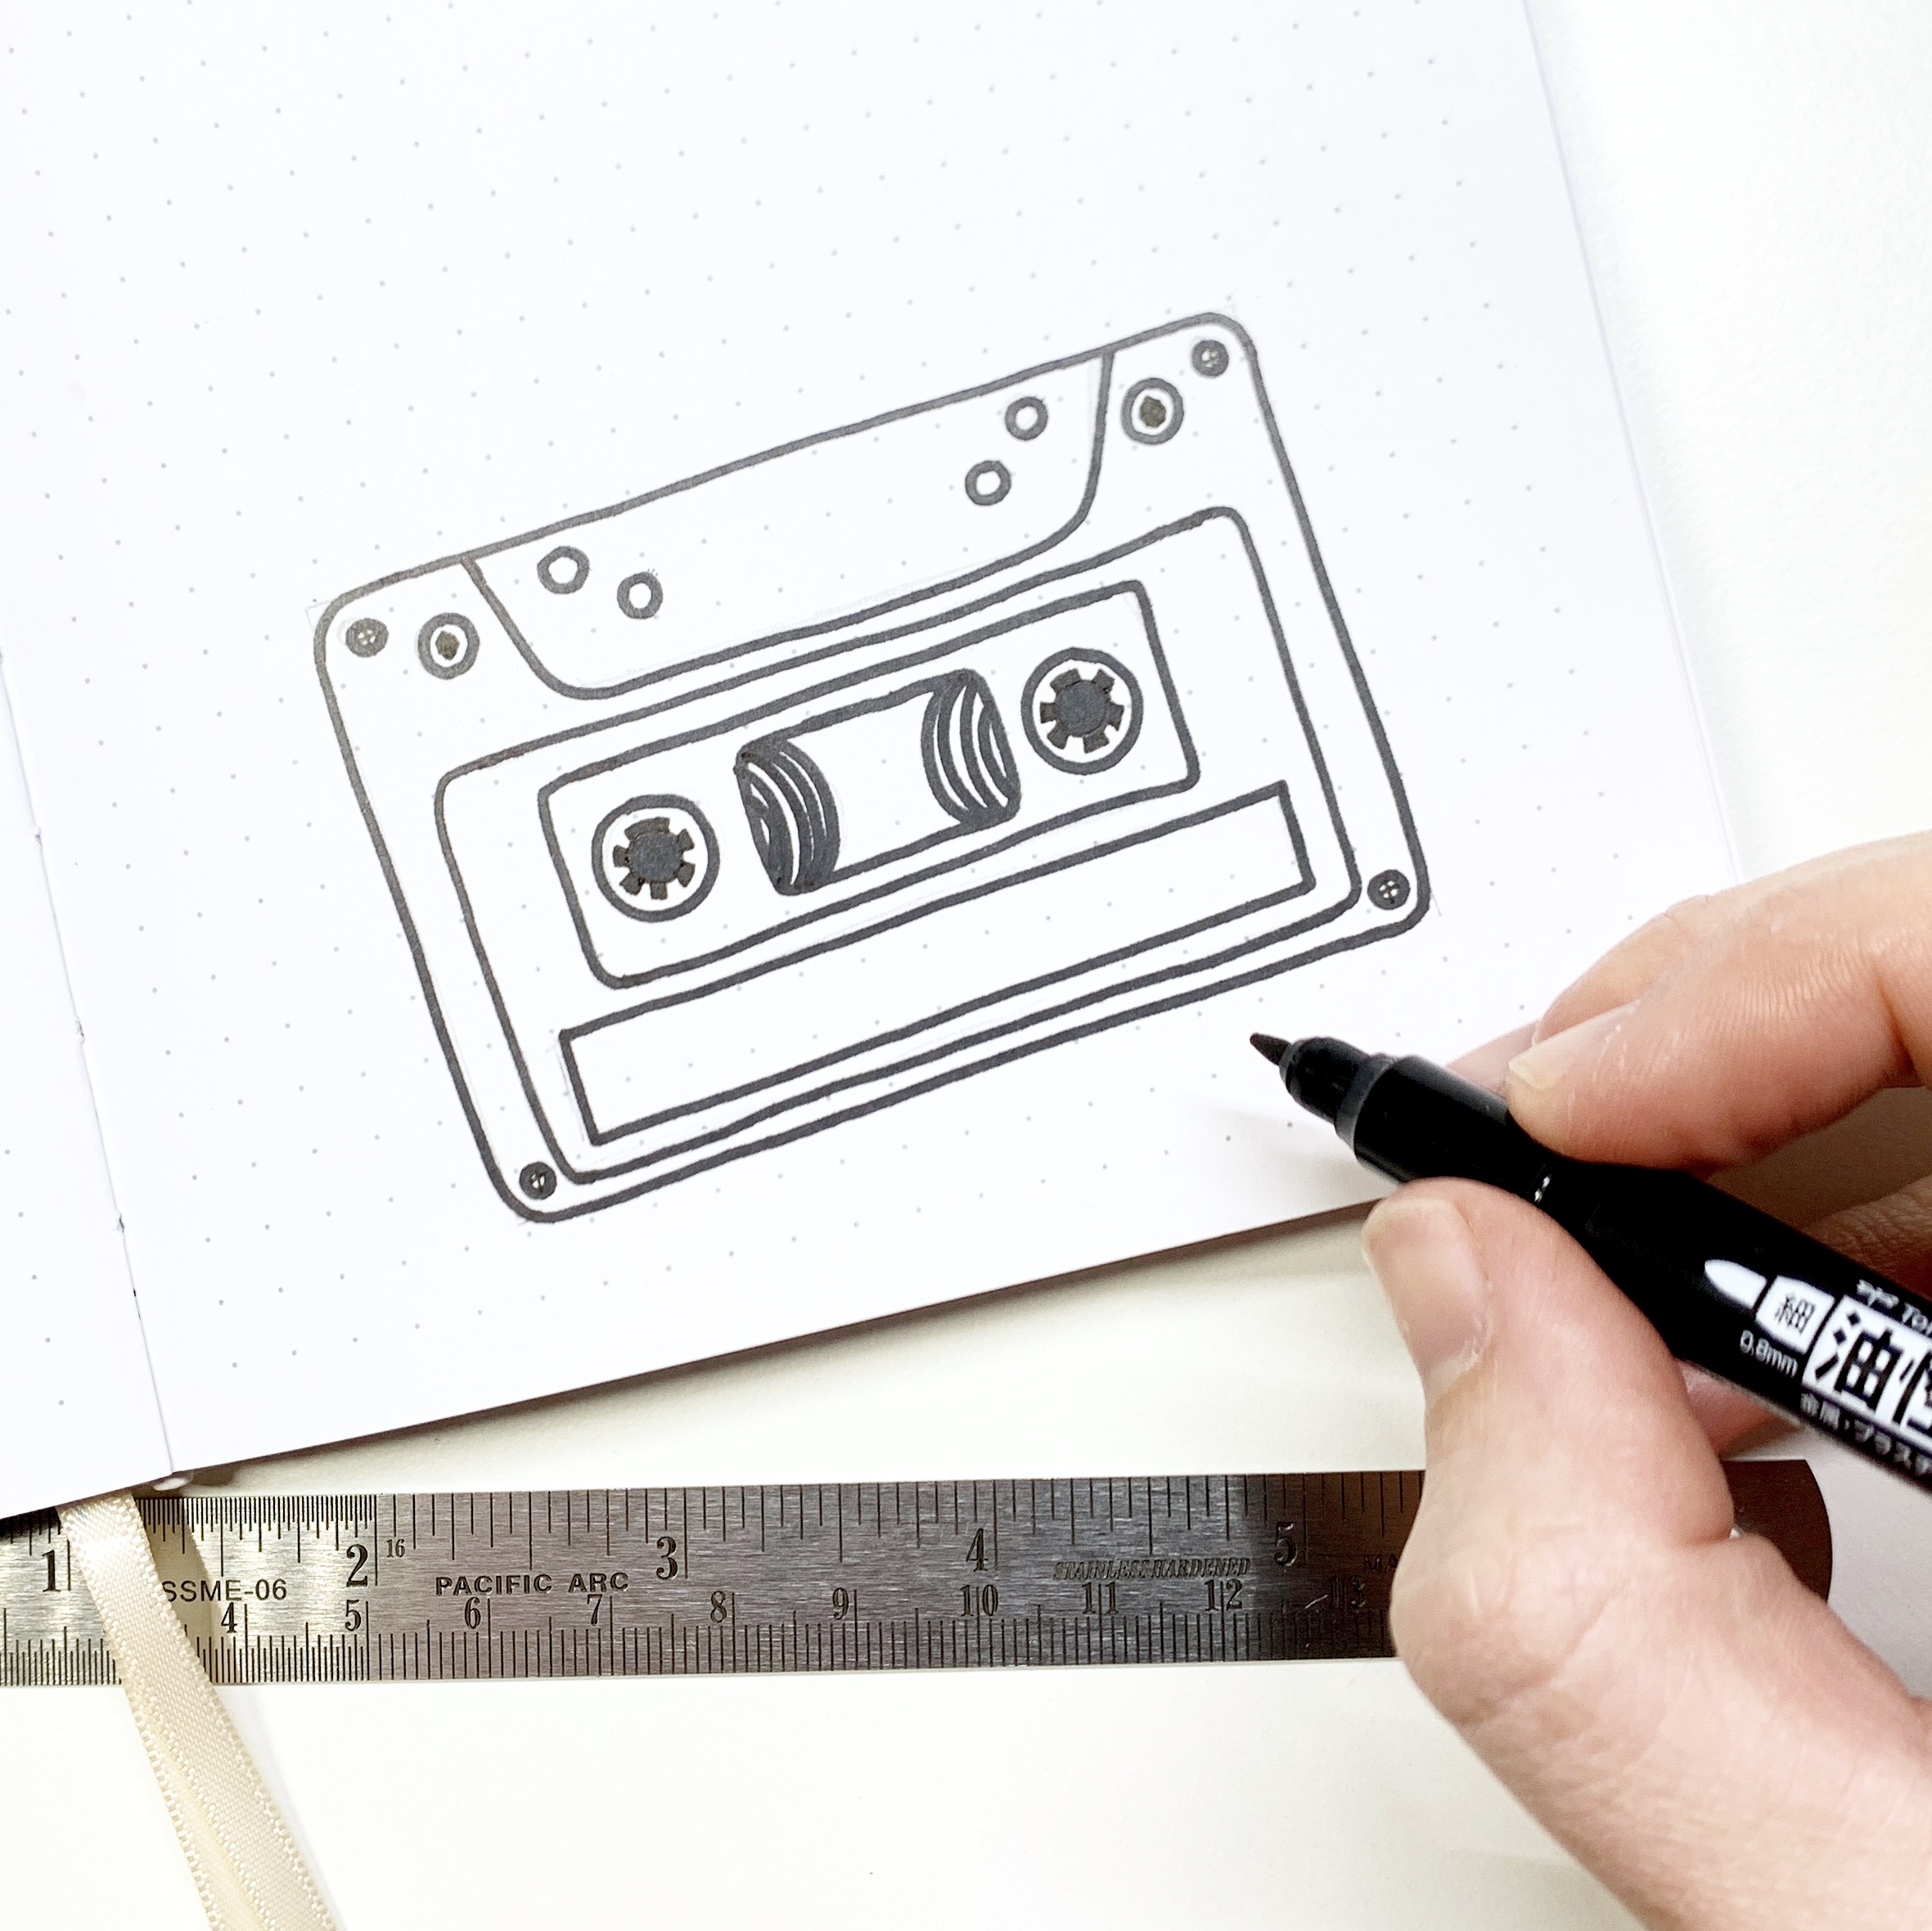 Learn how to create a cassette tape habit tracker in your dot grid notebook with Adrienne from @studio80design!